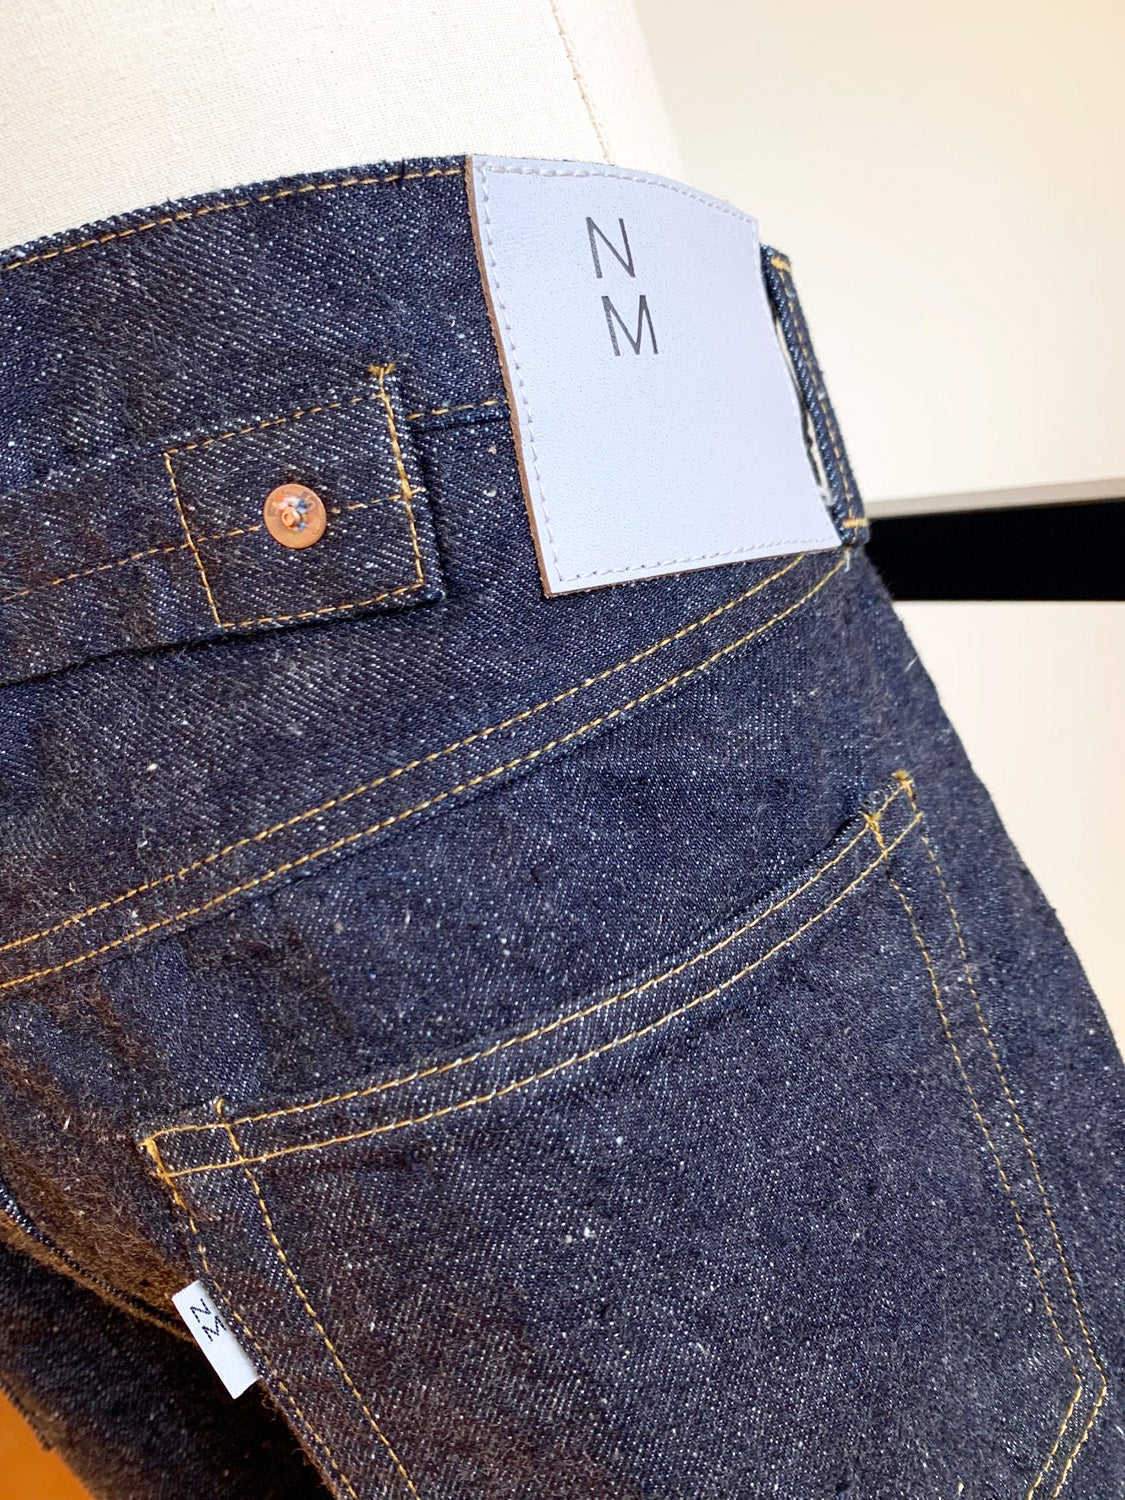 NEW MANUAL #002 1942 LV JEANS